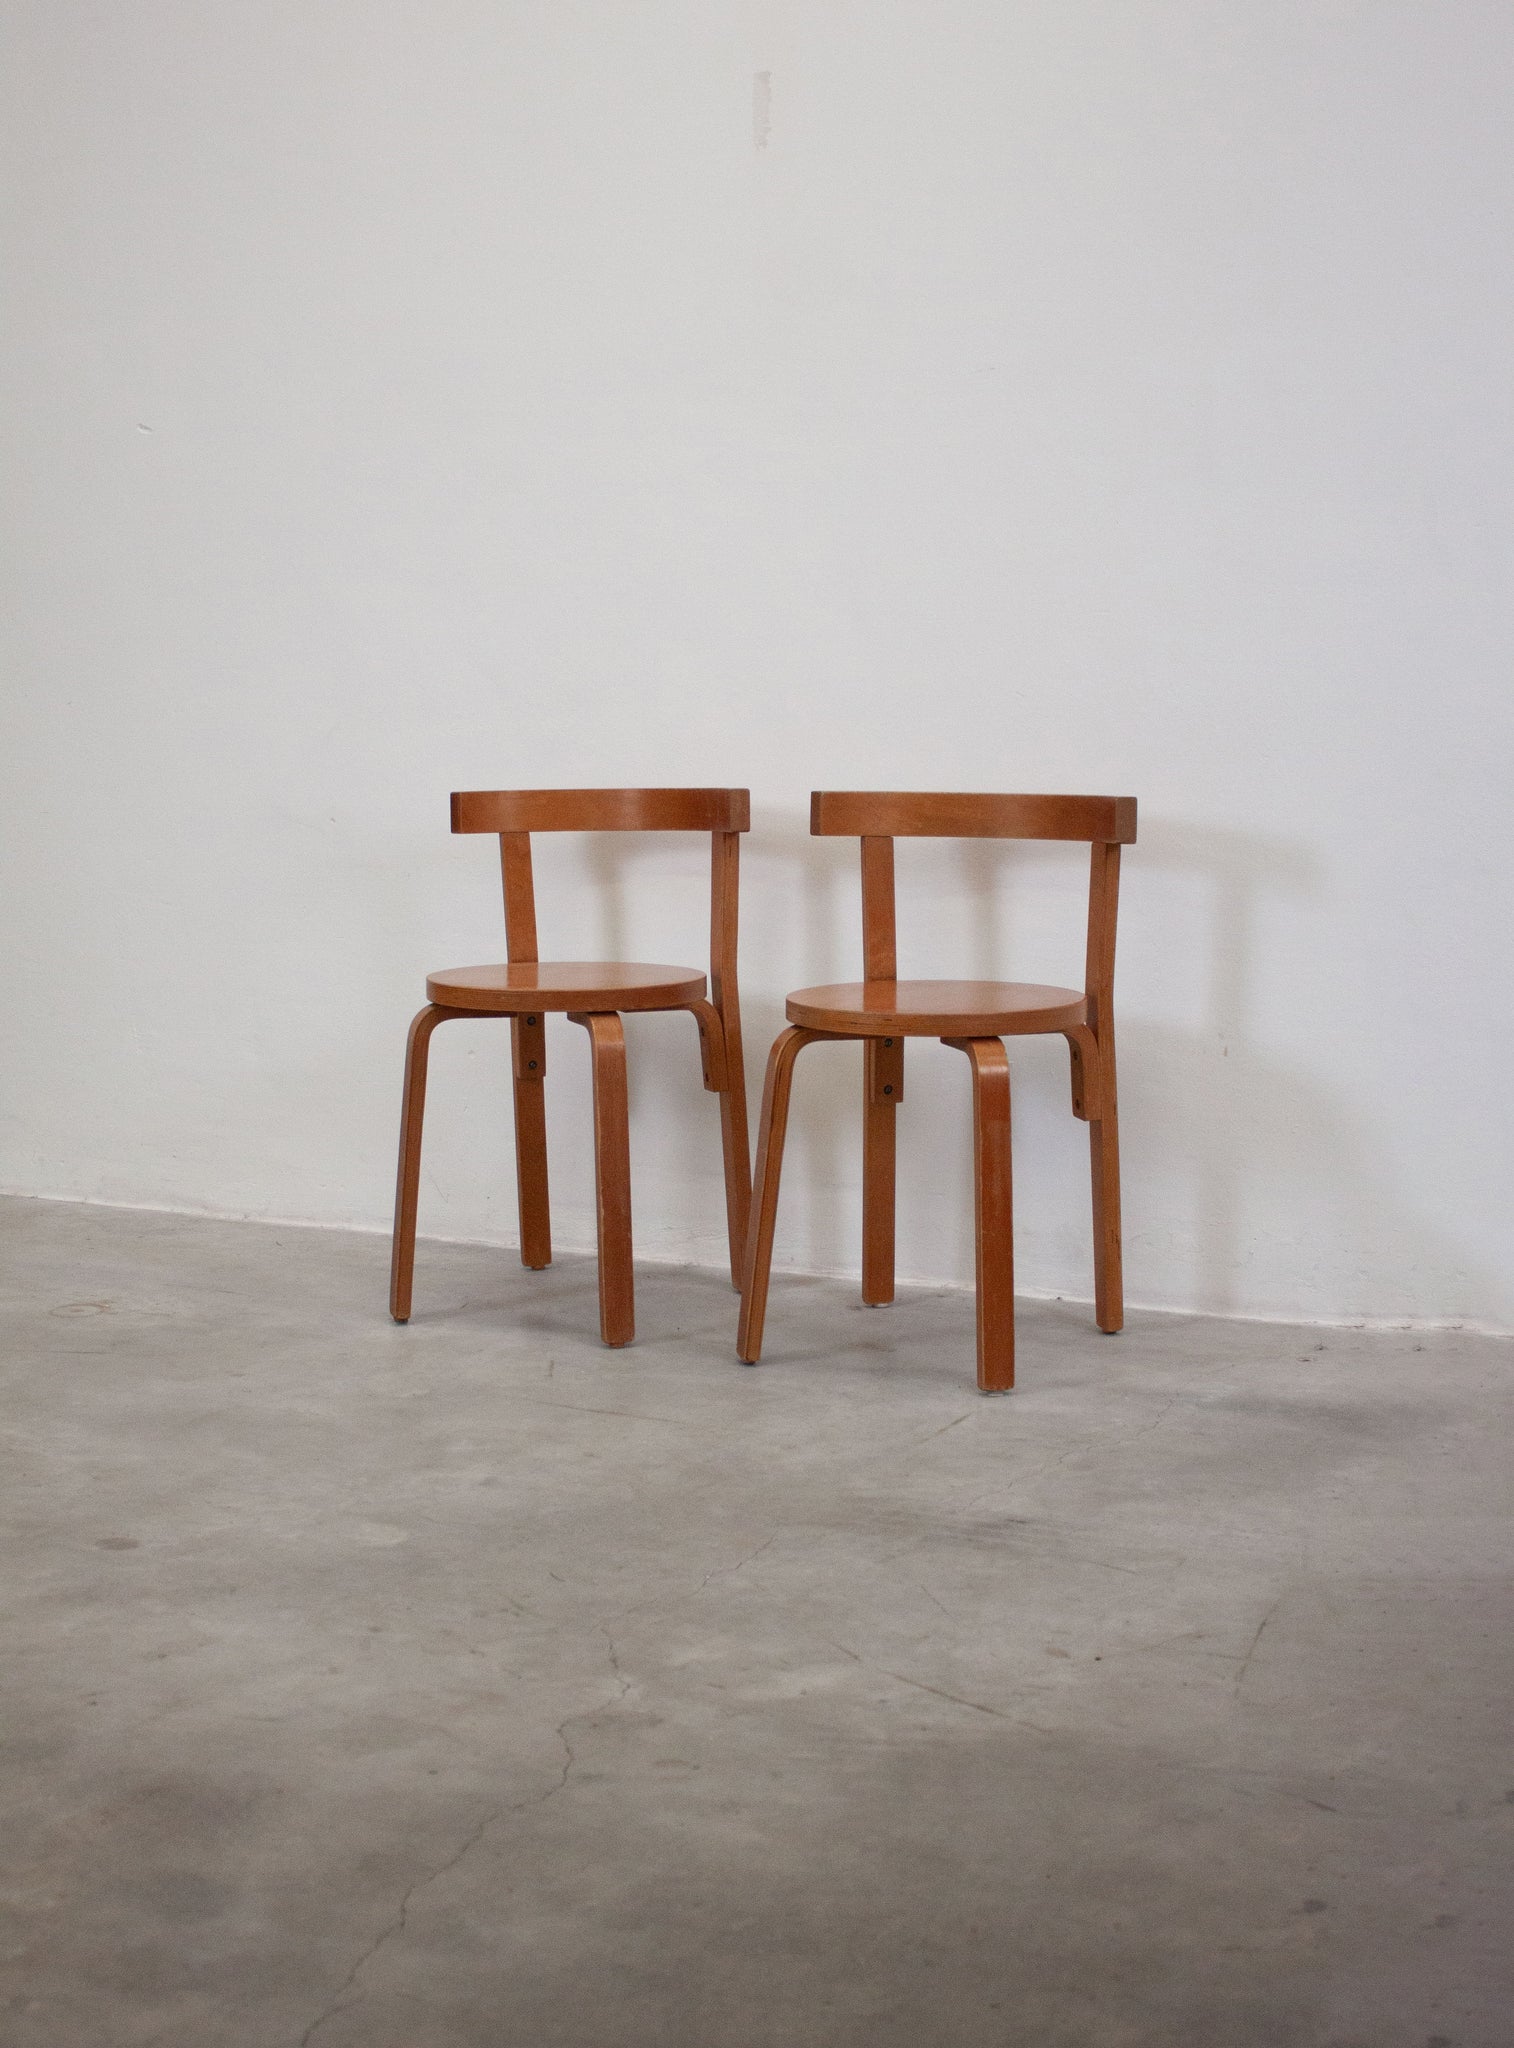 Plywood Chairs in style of Alvar Aalto